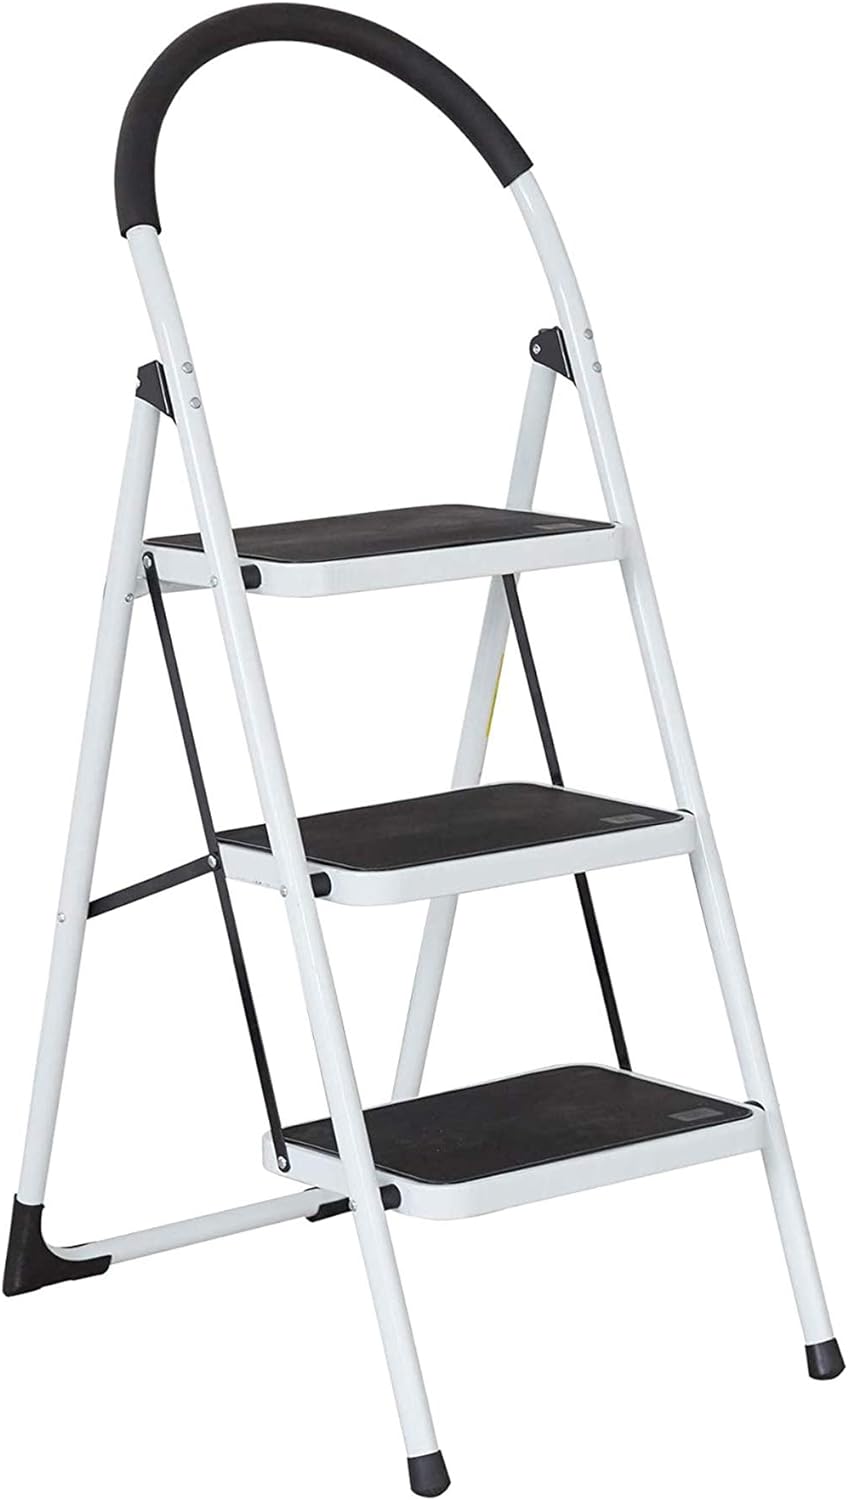 Neat-Living 3 Step Ladder Folding Step Stool with Grips Sturdy Step Stool with Wide Pedal 330 Lbs Capacity